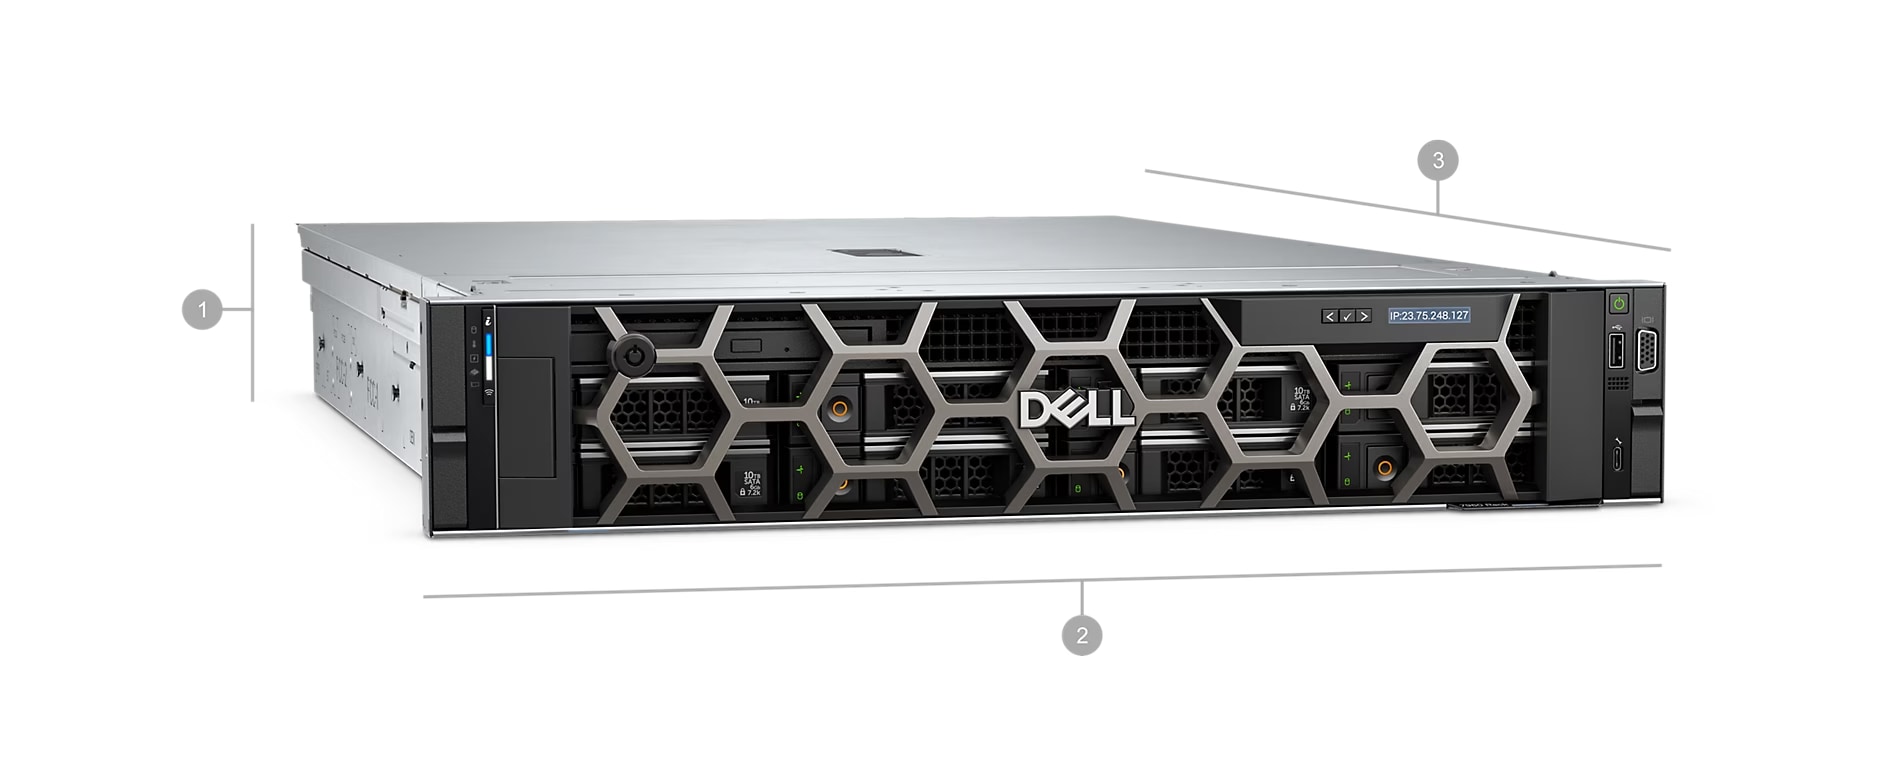 Dell Precision 7960 Rack Workstation with numbers from 1 to 4 showing the product dimensions and weight.